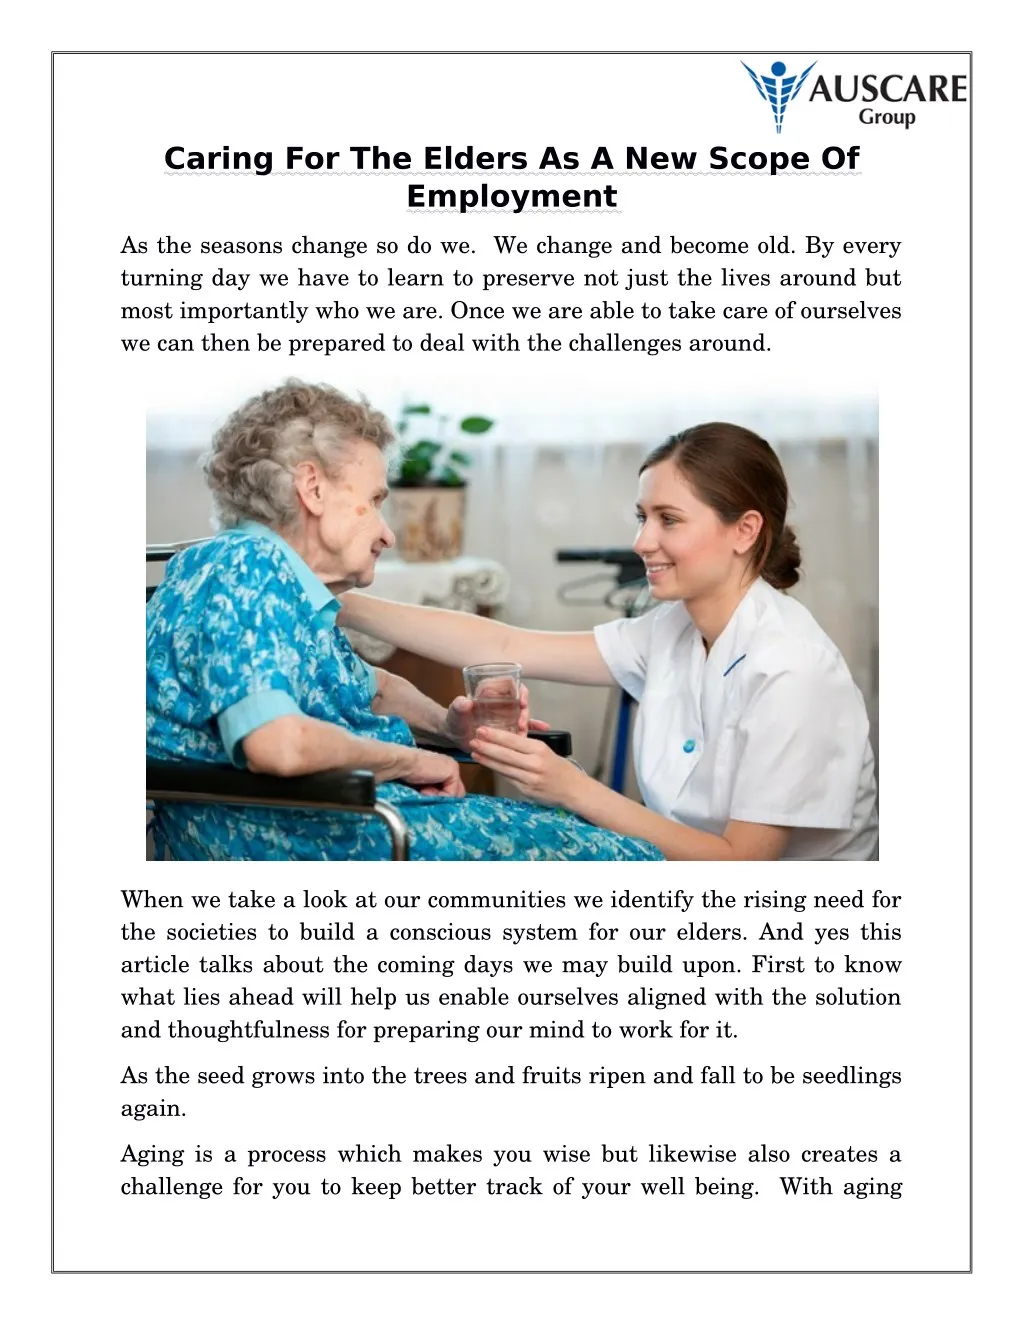 caring for the elders as a new scope of employment